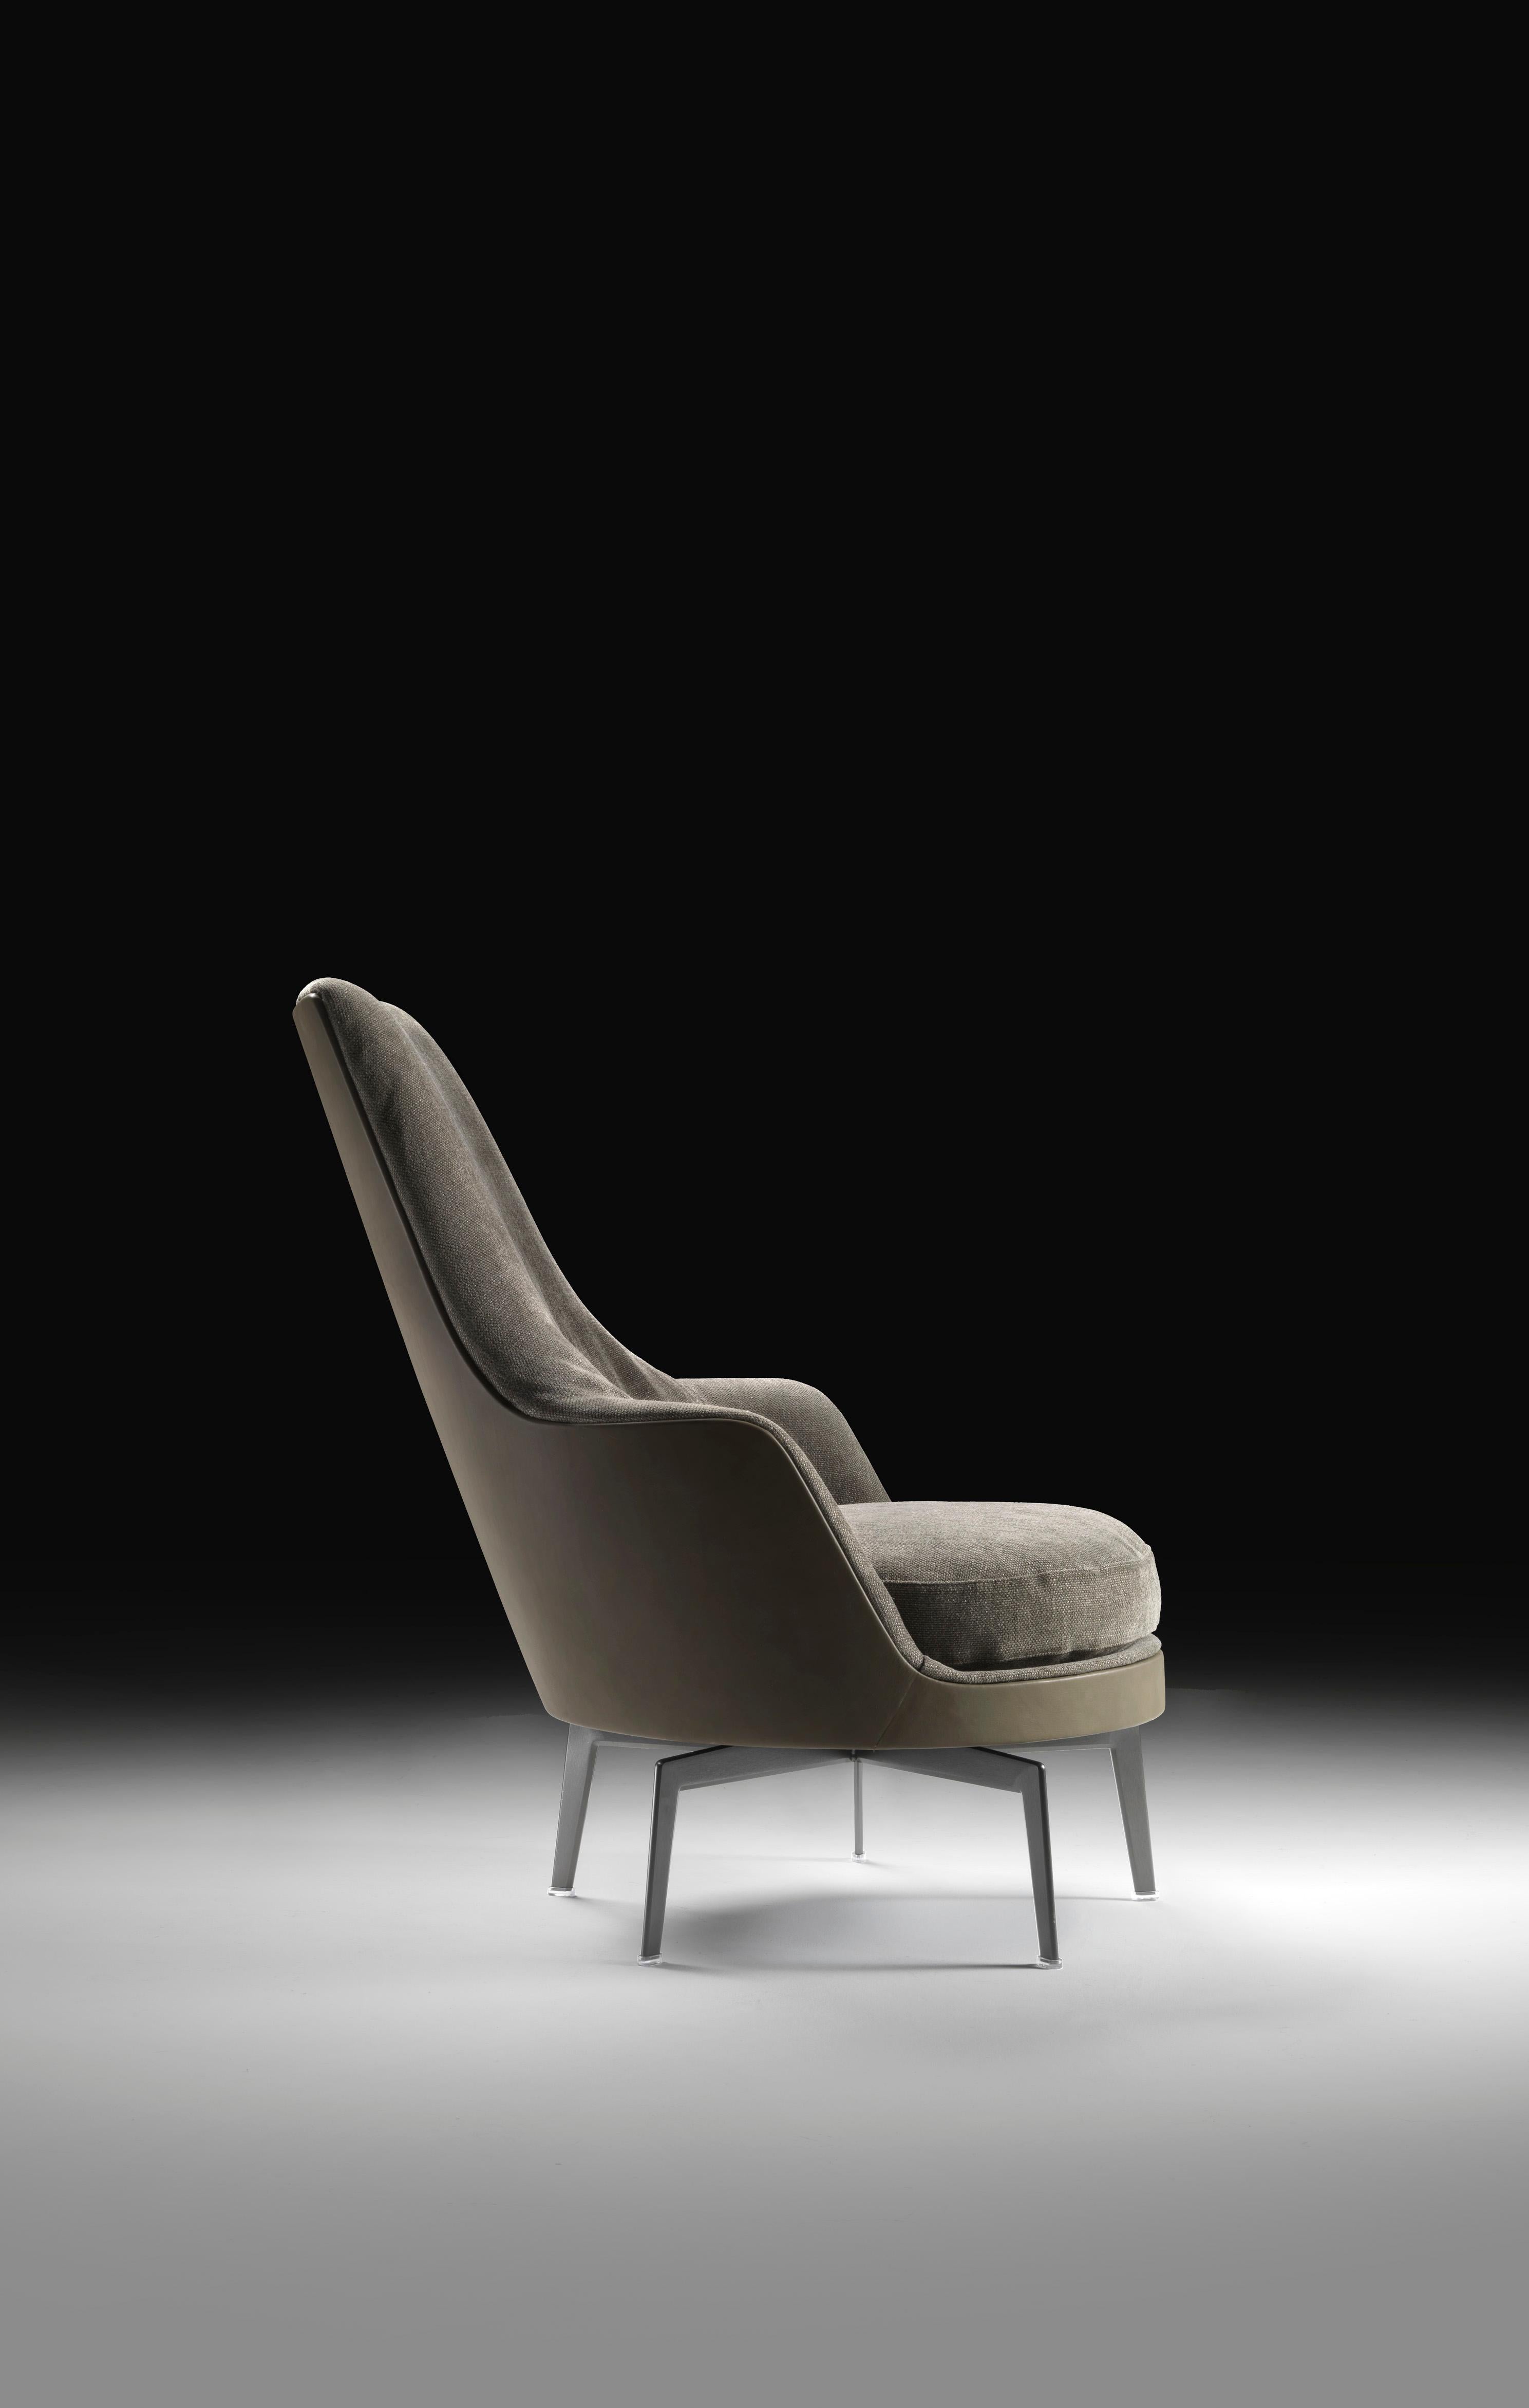 Mohair and Leather with Bronzed Base Guscioalto Soft Armchair by Flexform In Excellent Condition For Sale In Toronto, Ontario